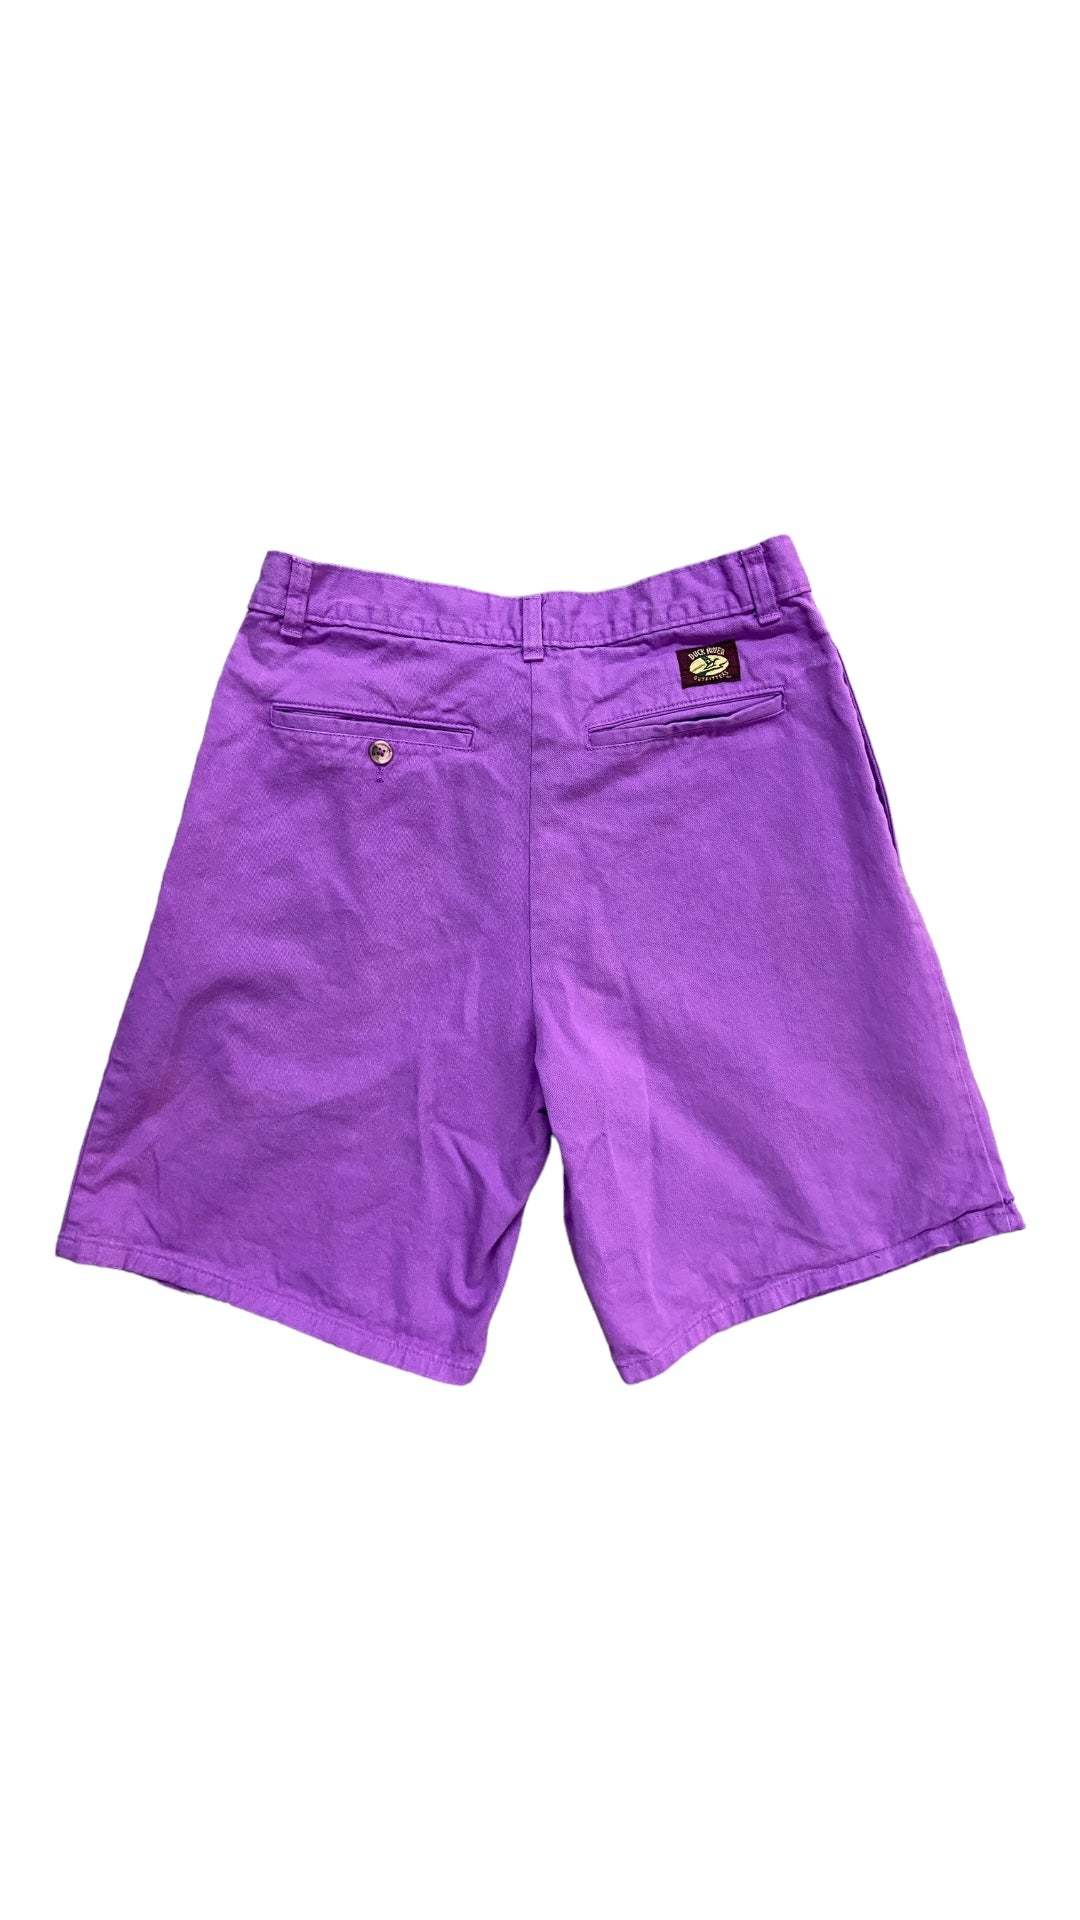 Duck River Outfitters Purple Shorts sz 30